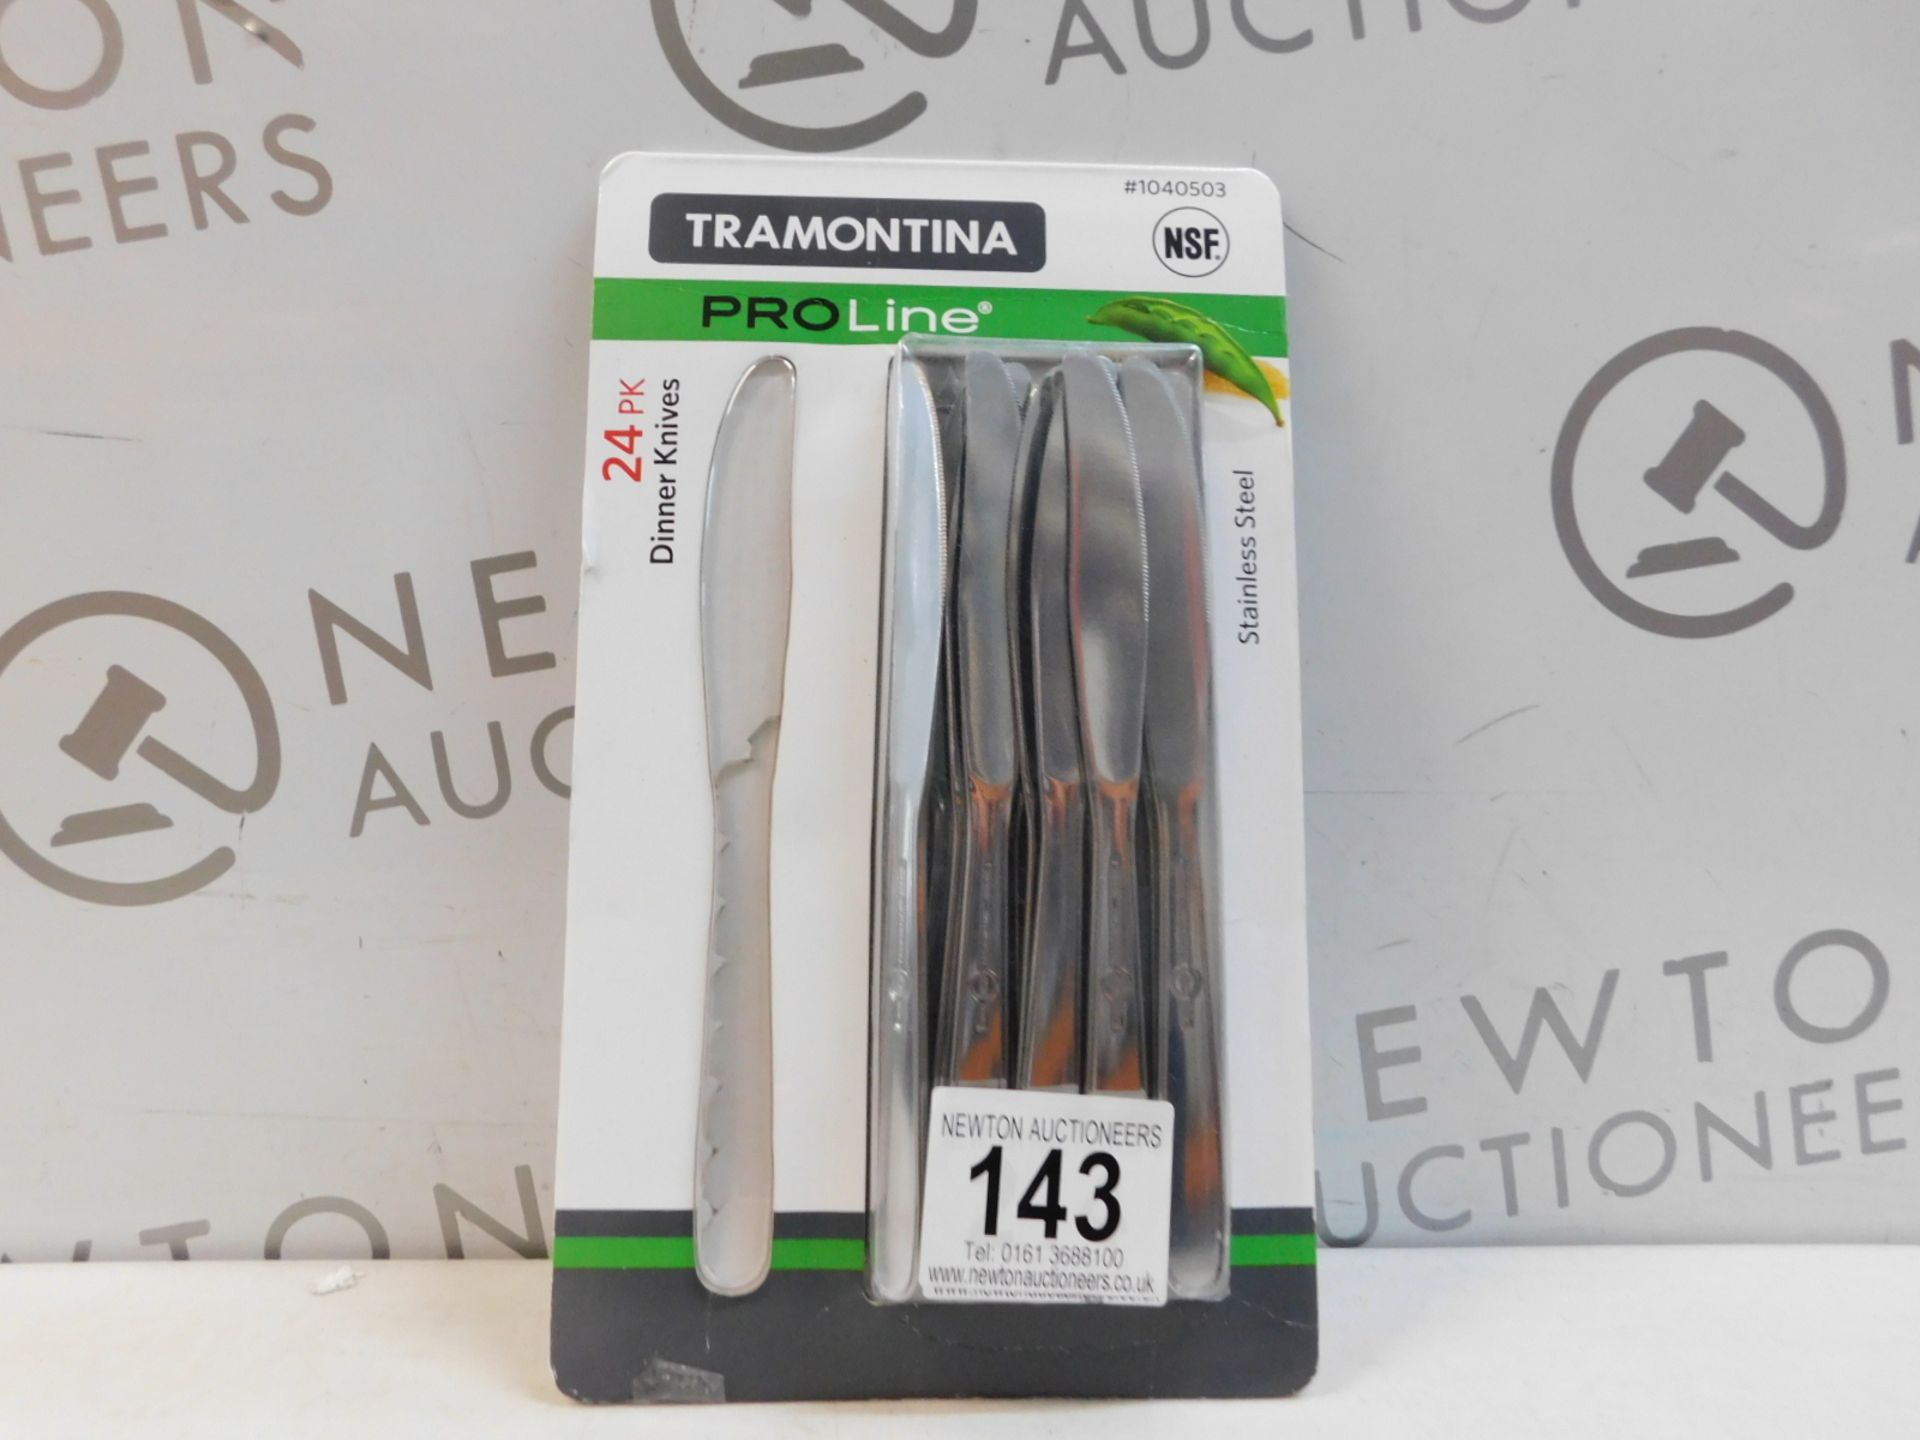 1 PACK OF TRAMONTINA PROLINE 24PK (APPROX) STAINLESS STEEL DINNER KNIVES RRP £22.99